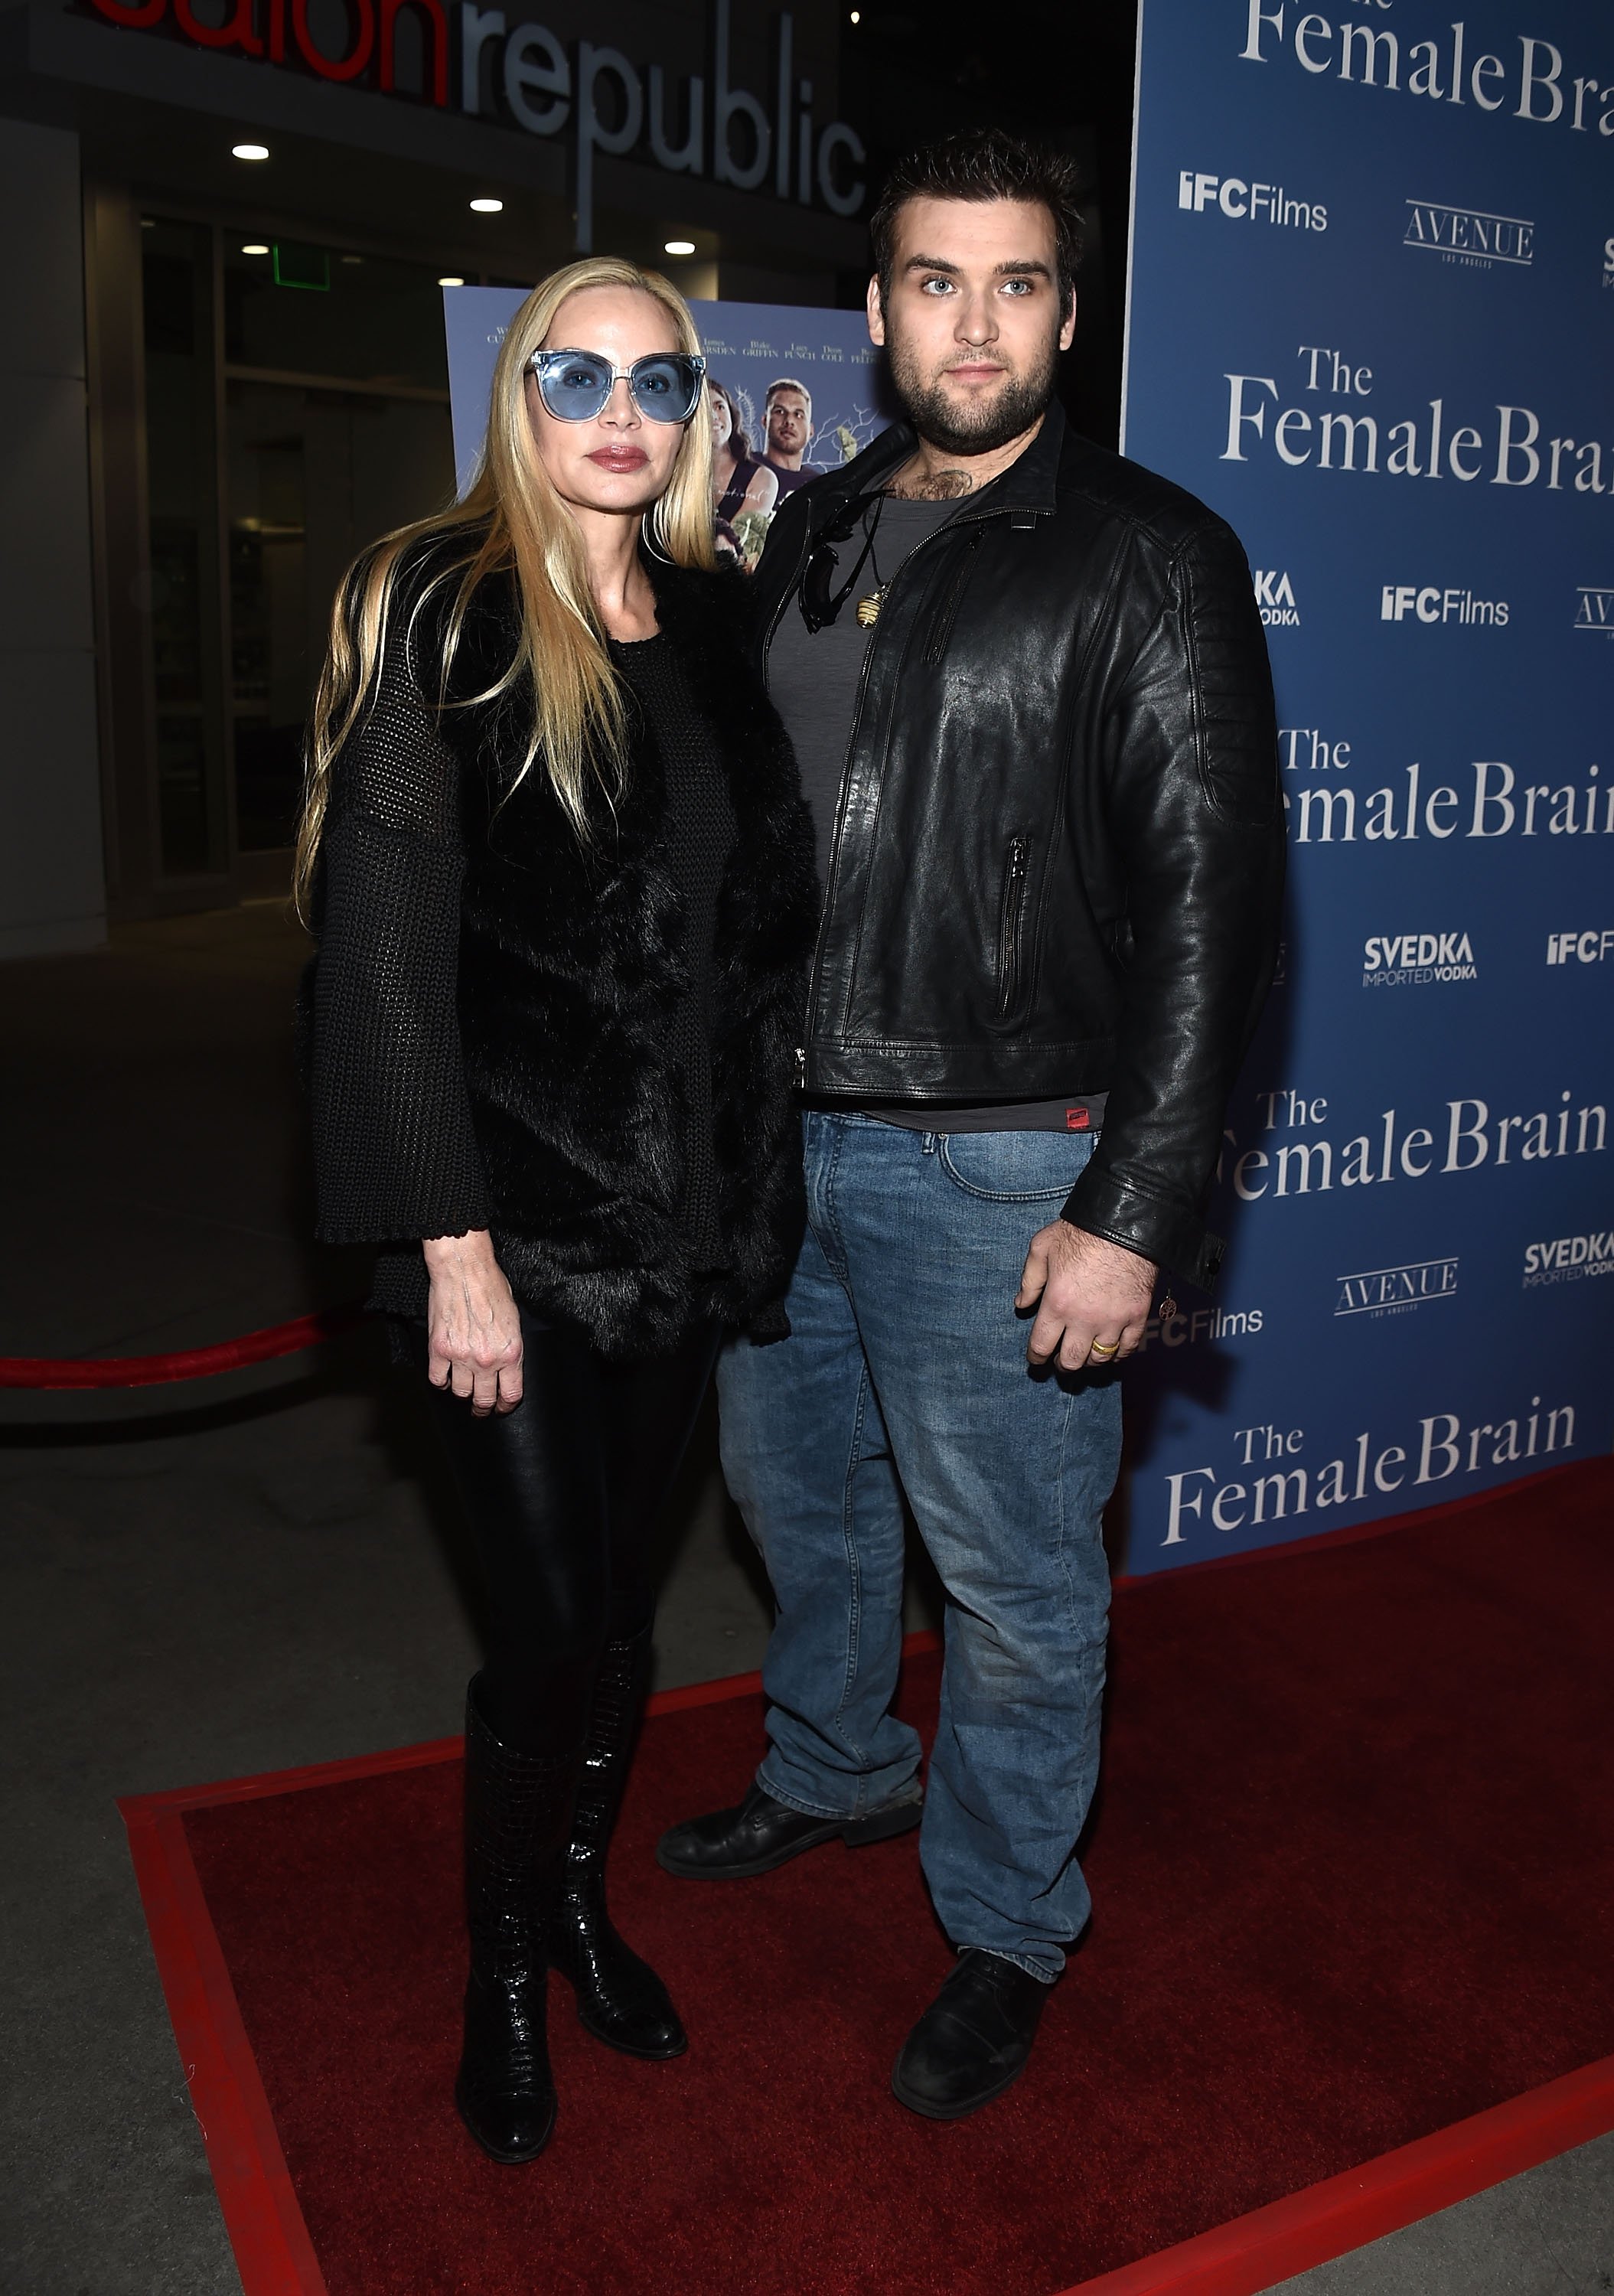 Christina Fulton (L) and actor Weston Cage arrive at the premiere of IFC Films' "The Female Brain" at the ArcLight Hollywood on February 1, 2018 in Hollywood, California | Source: Getty Images